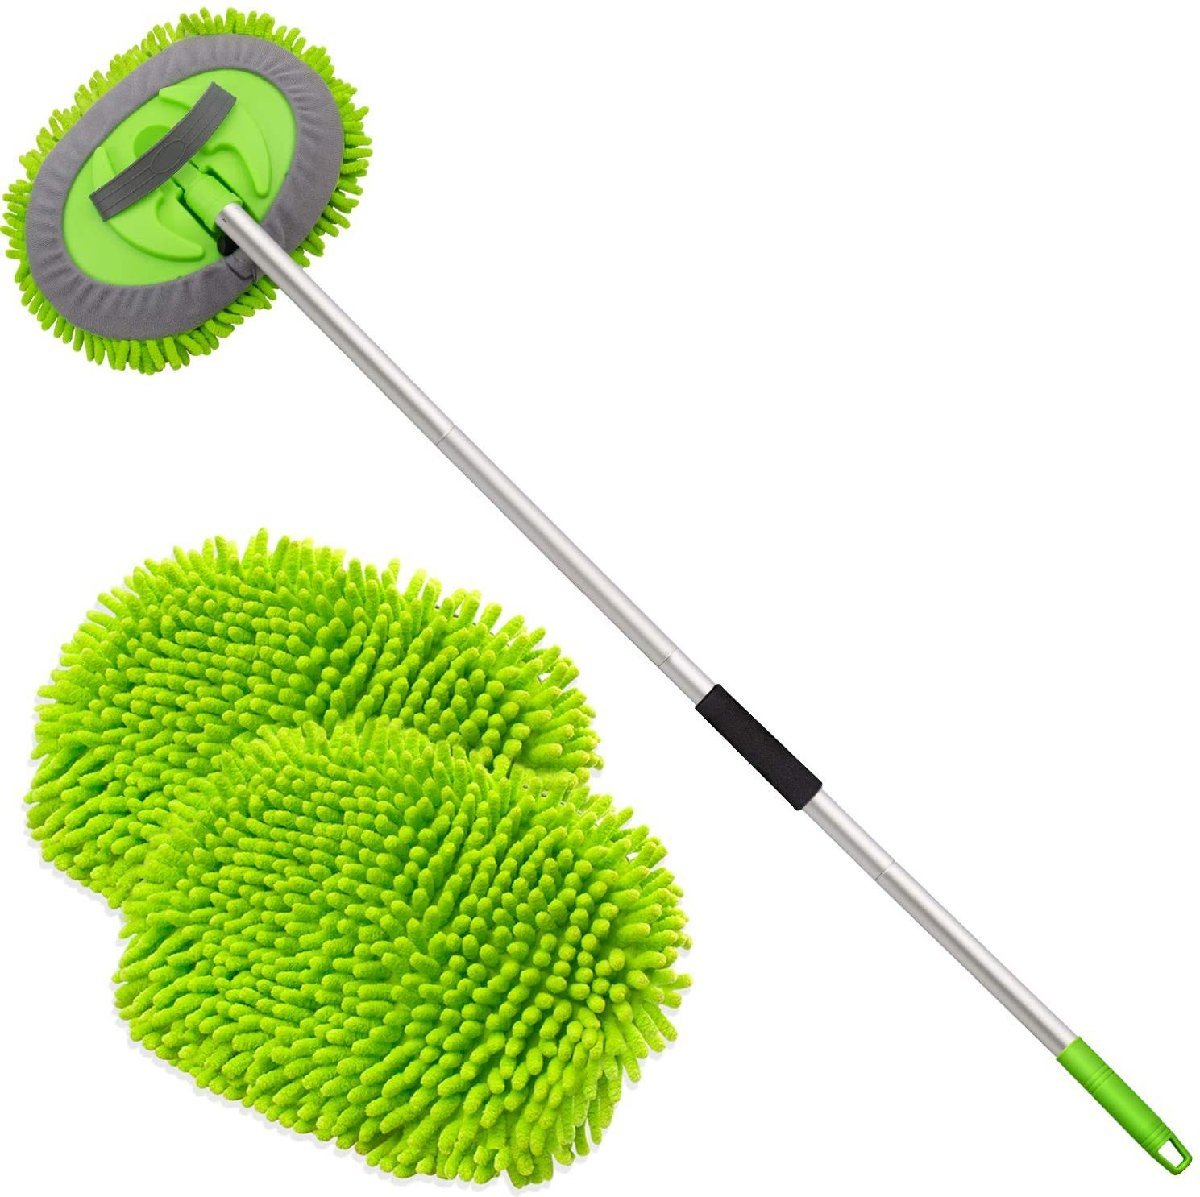  mop head 2 sheets mop two in one car wash brush sponge glove flexible type cleaning removed possibility SUV RV automobile bus length 160cm*